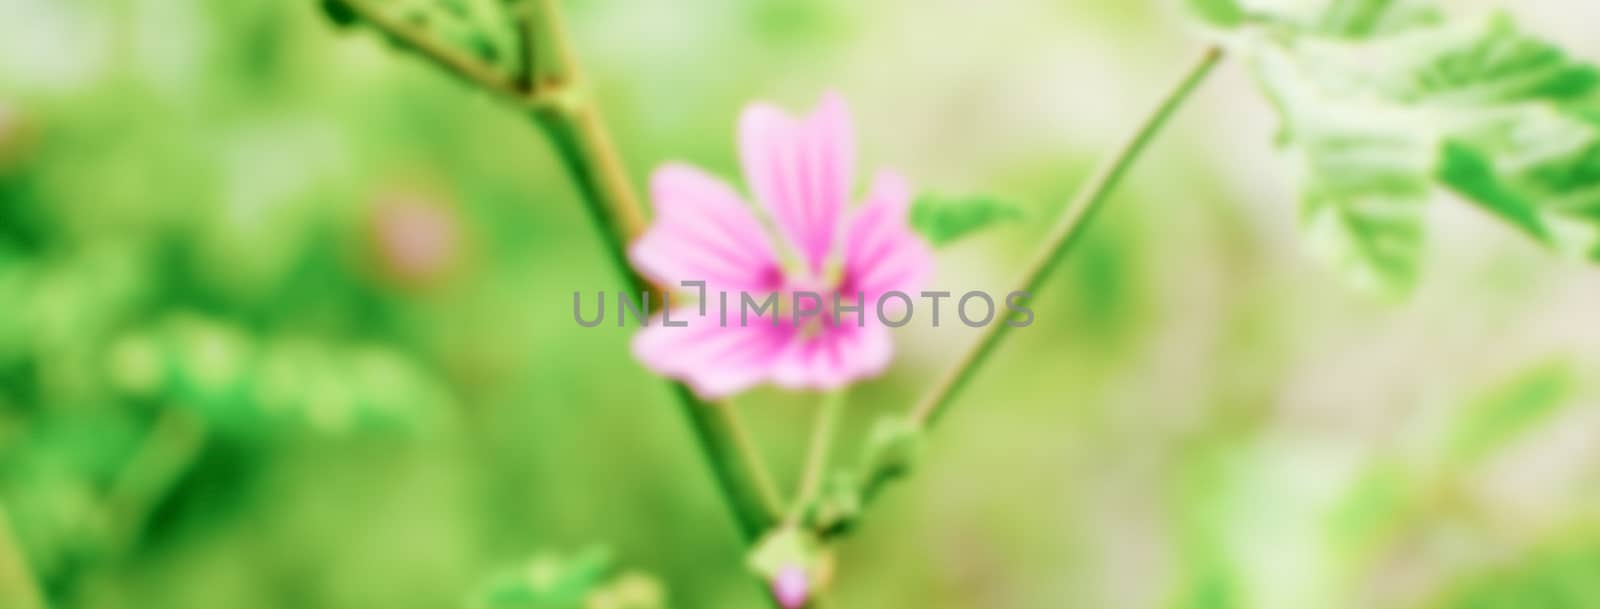 Defocused background of a purple wild flower on a green field. Intentionally blurred post production for bokeh effect